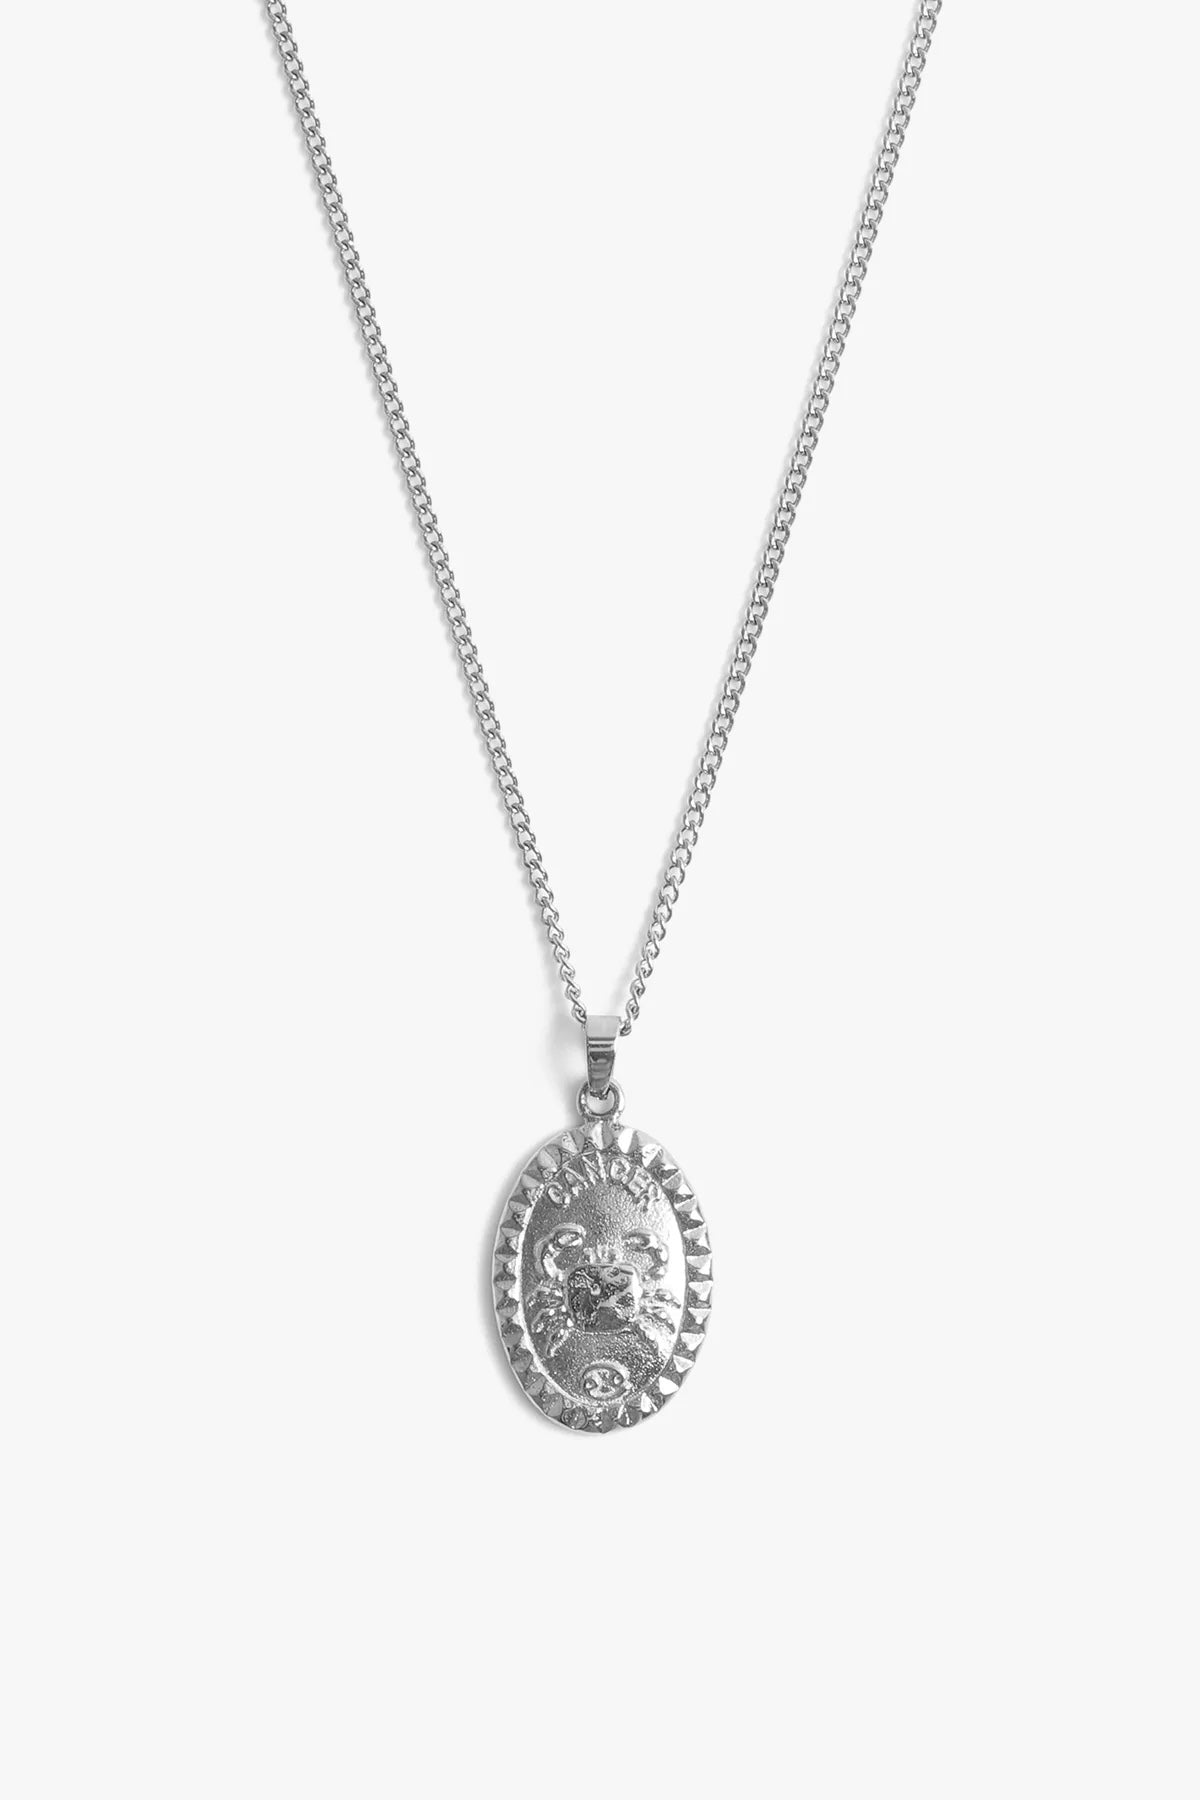 Marrin Costello - Cancer Necklace - Silver